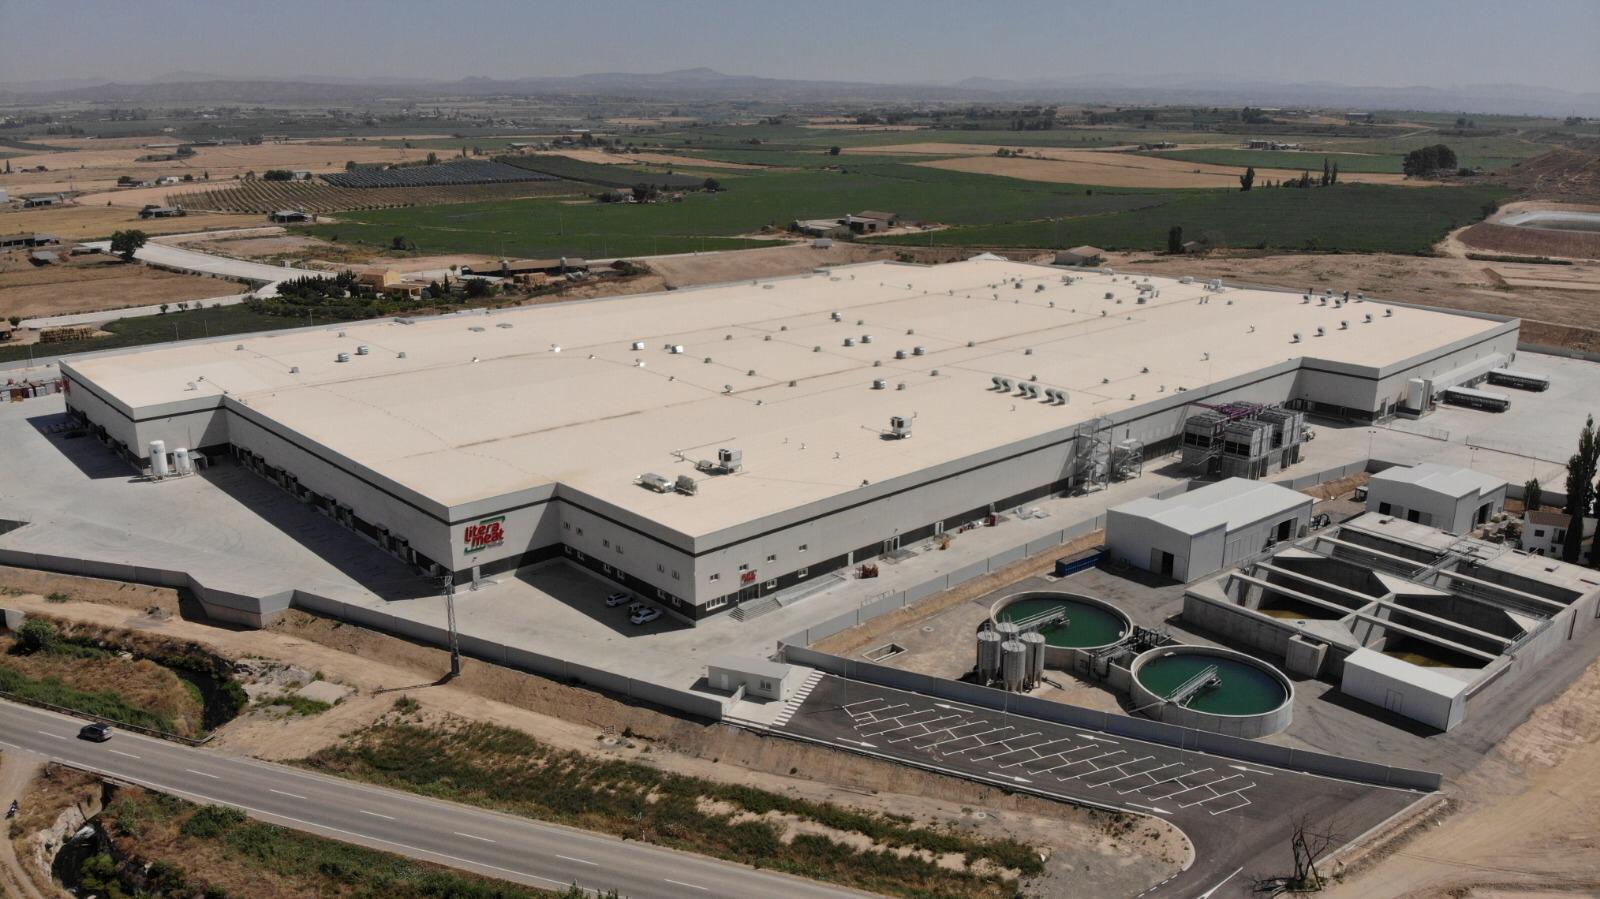 Largest, most modern slaughterhouse in Spain belonging to Pini Group